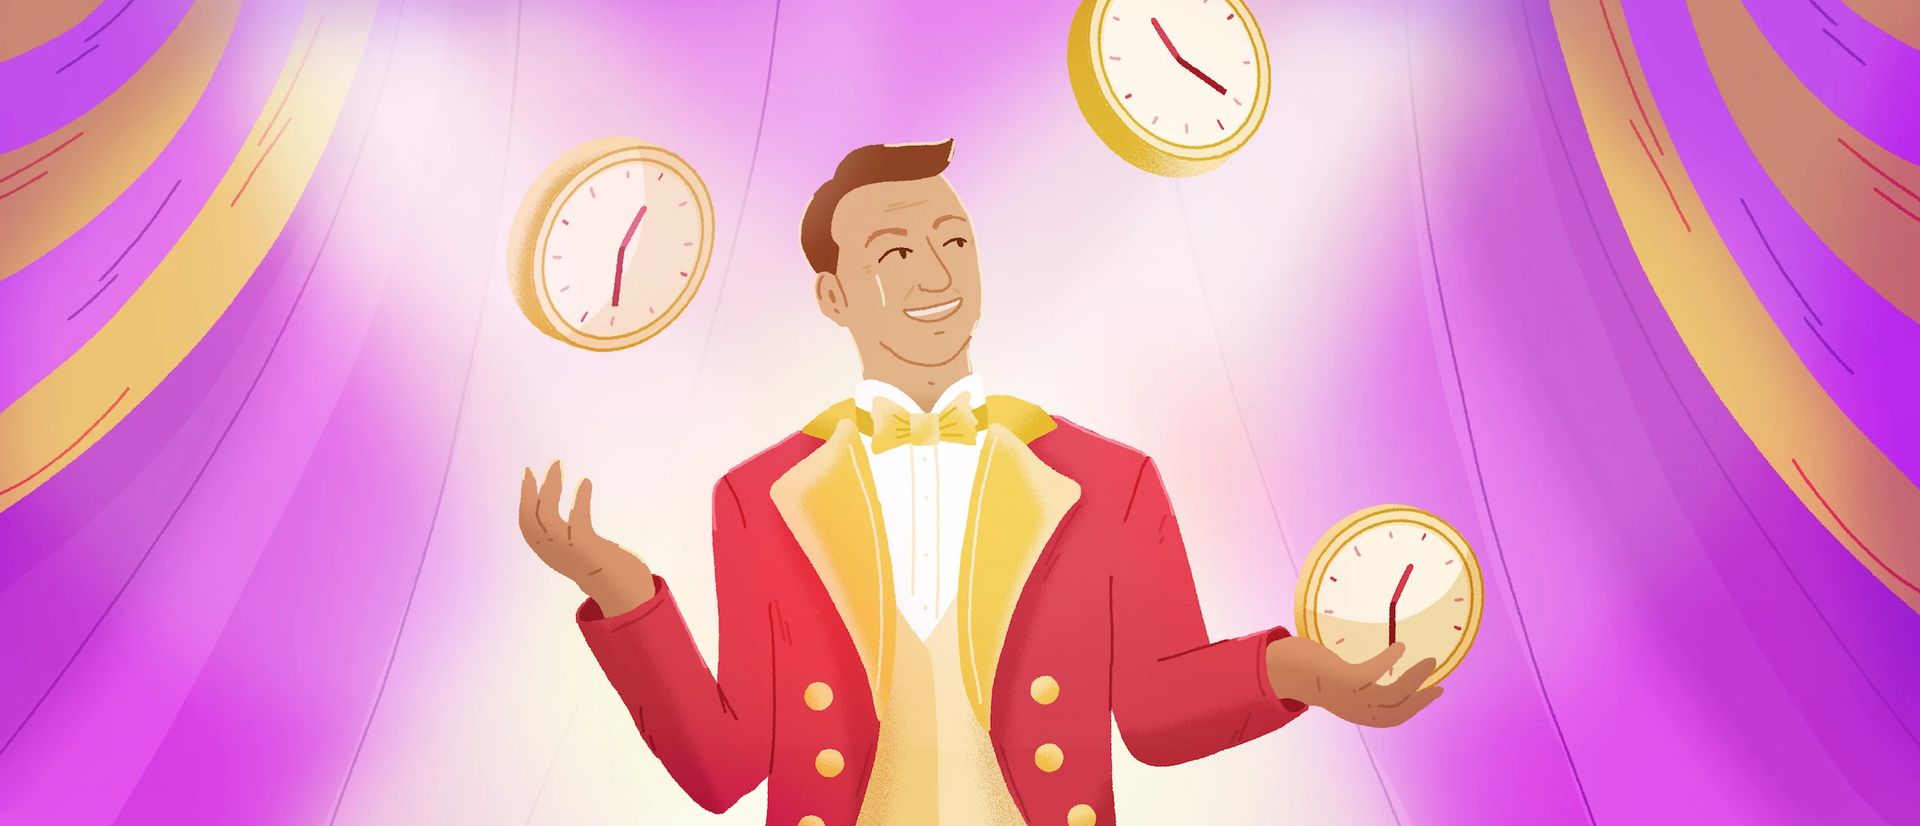 Man in circus costume juggling with clocks